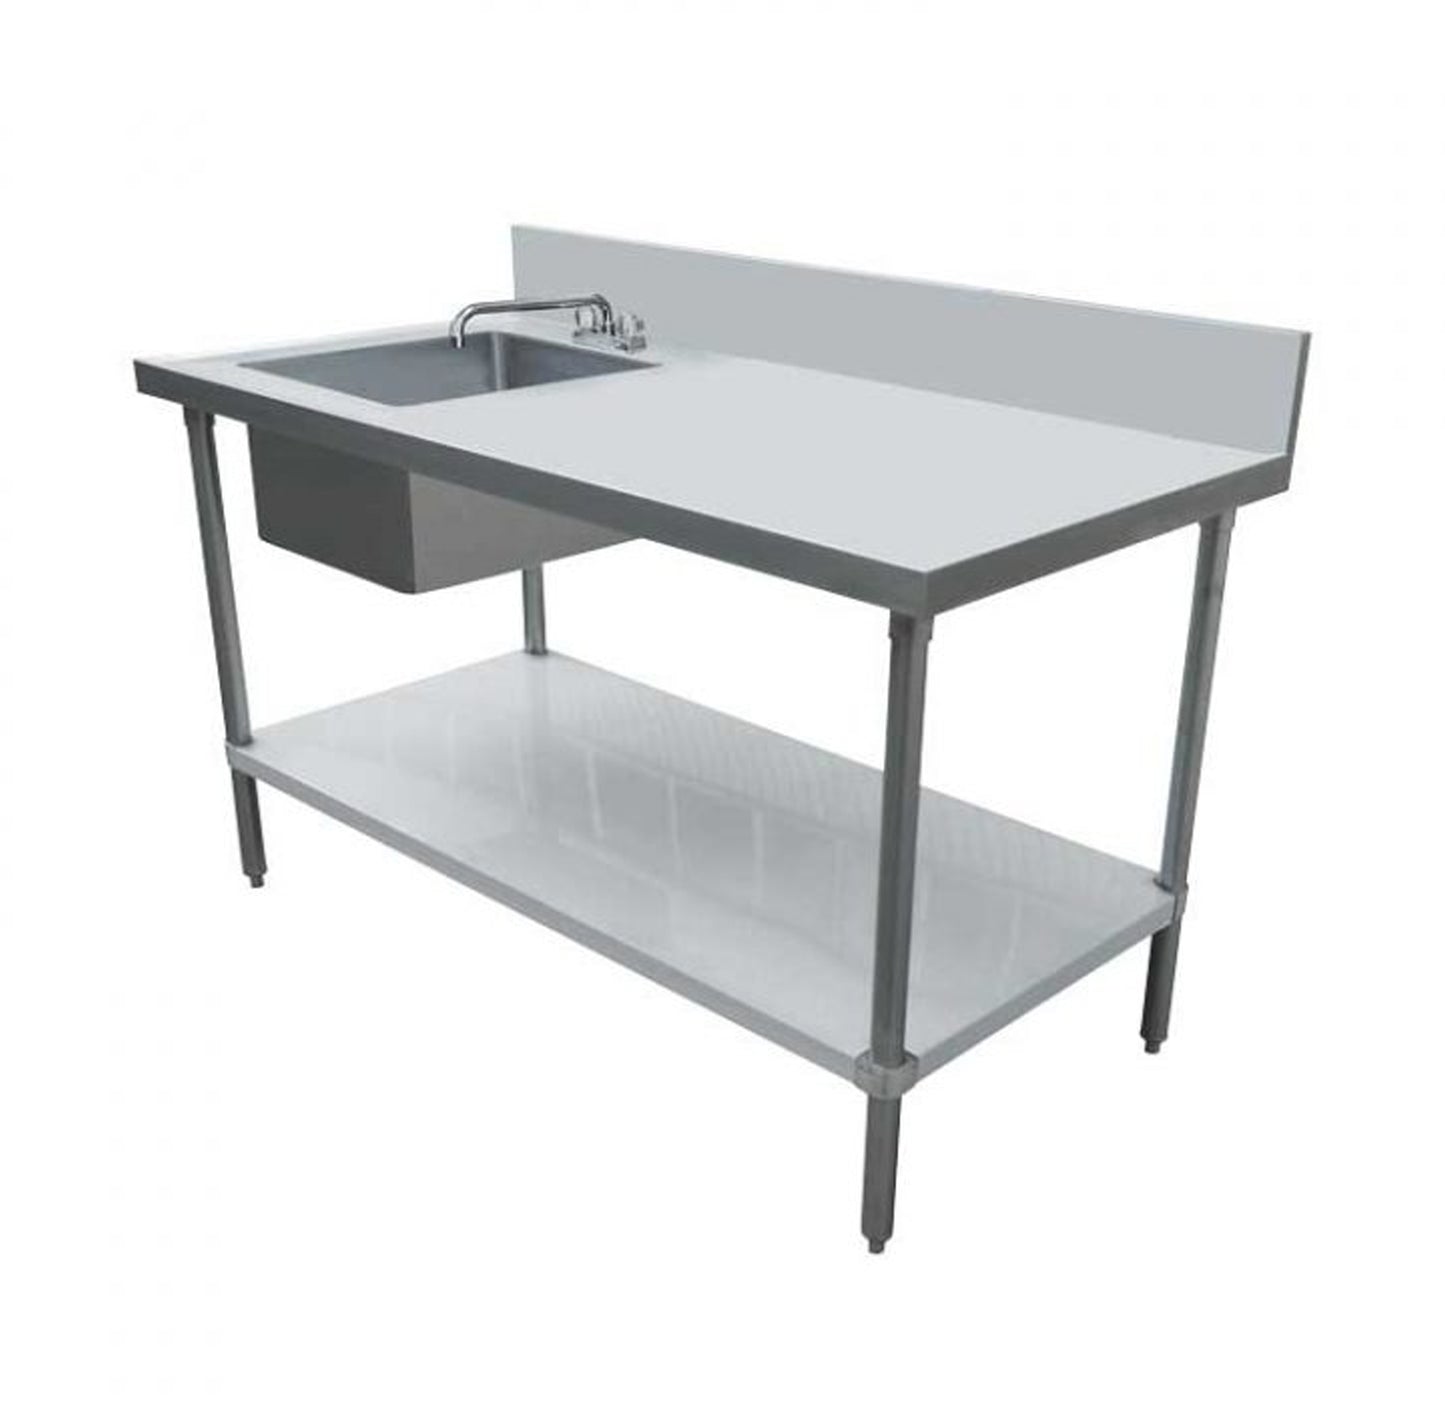 Omcan 44301. 24″ x 72″ All Stainless Steel Table with Left Sink and 6″ Backsplash